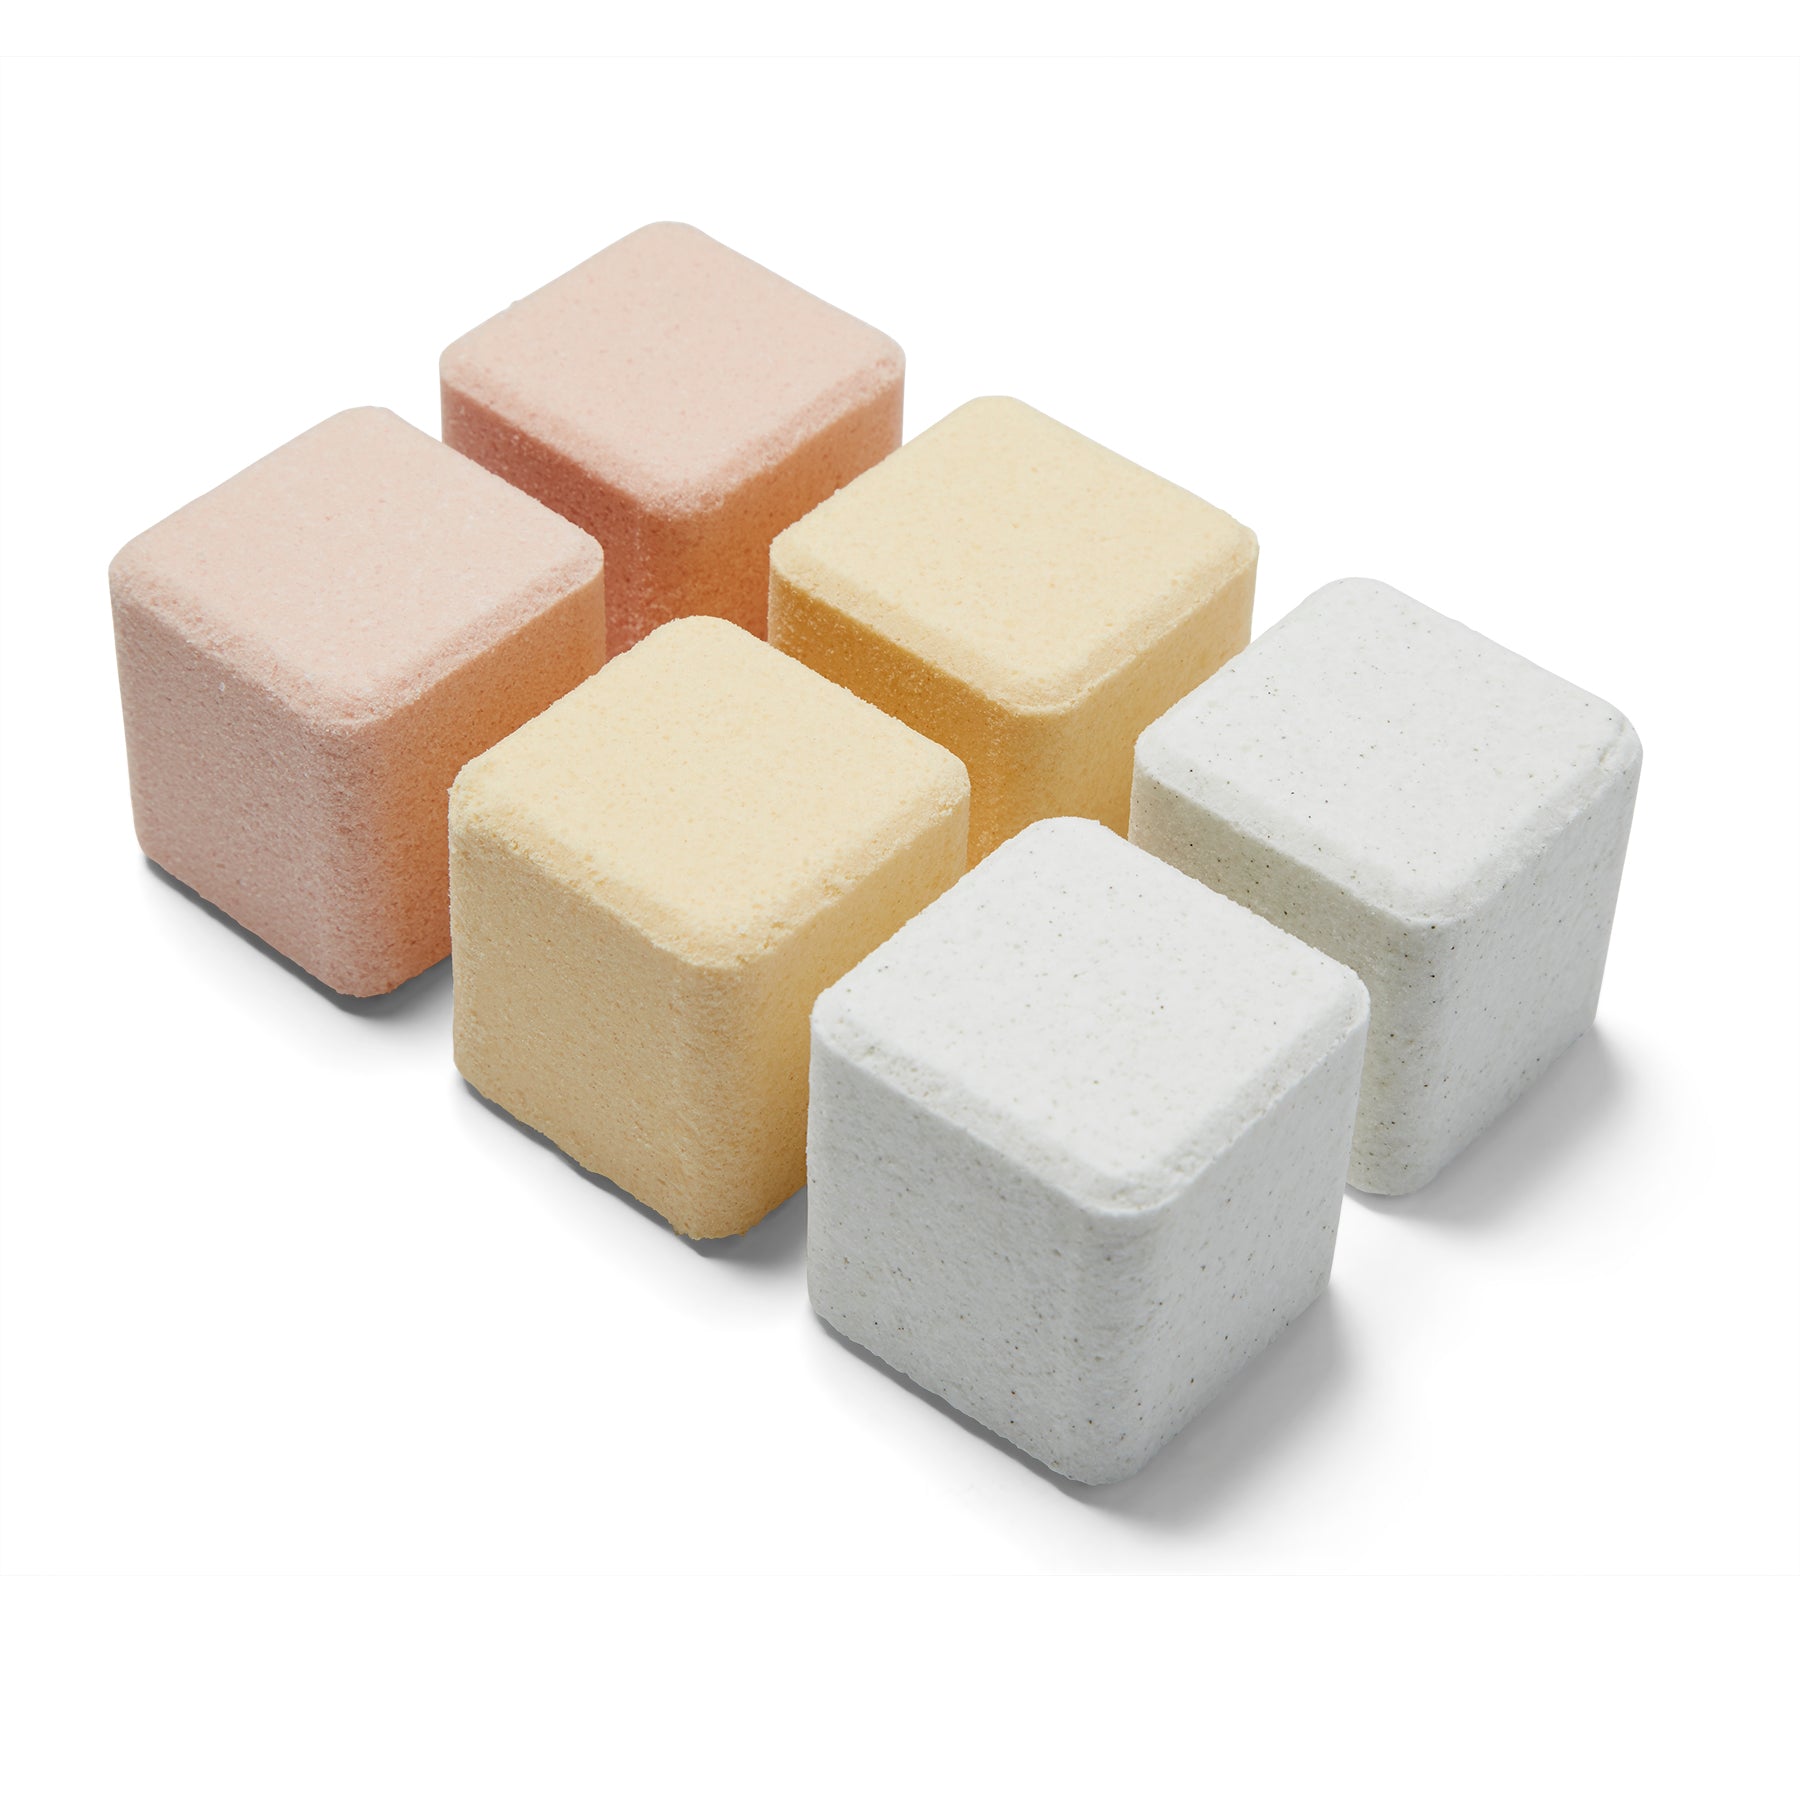 Six Yuzu Soap Bath Bomb Cubes lined up next to each other in rows.  